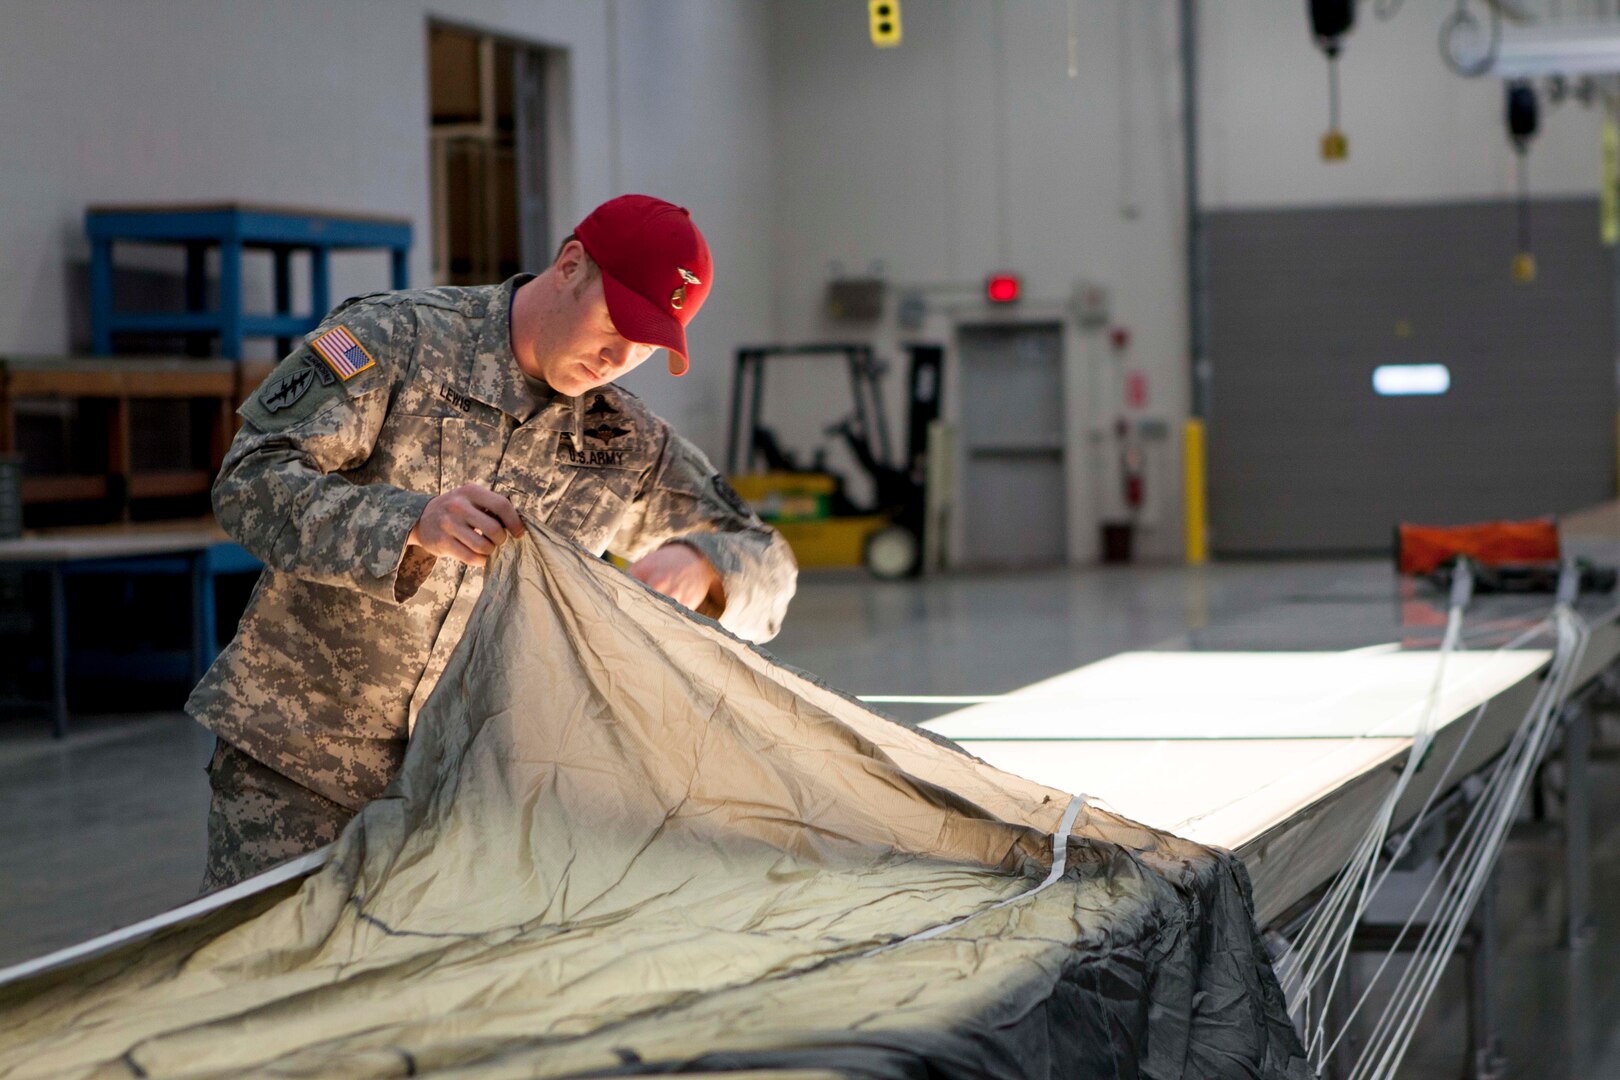 Army Staff Sgt. David Lewis inspects the canopy of a parachute before packing it for use. Lewis is an airborne rigger with DLA Distribution Susquehanna, Pa.